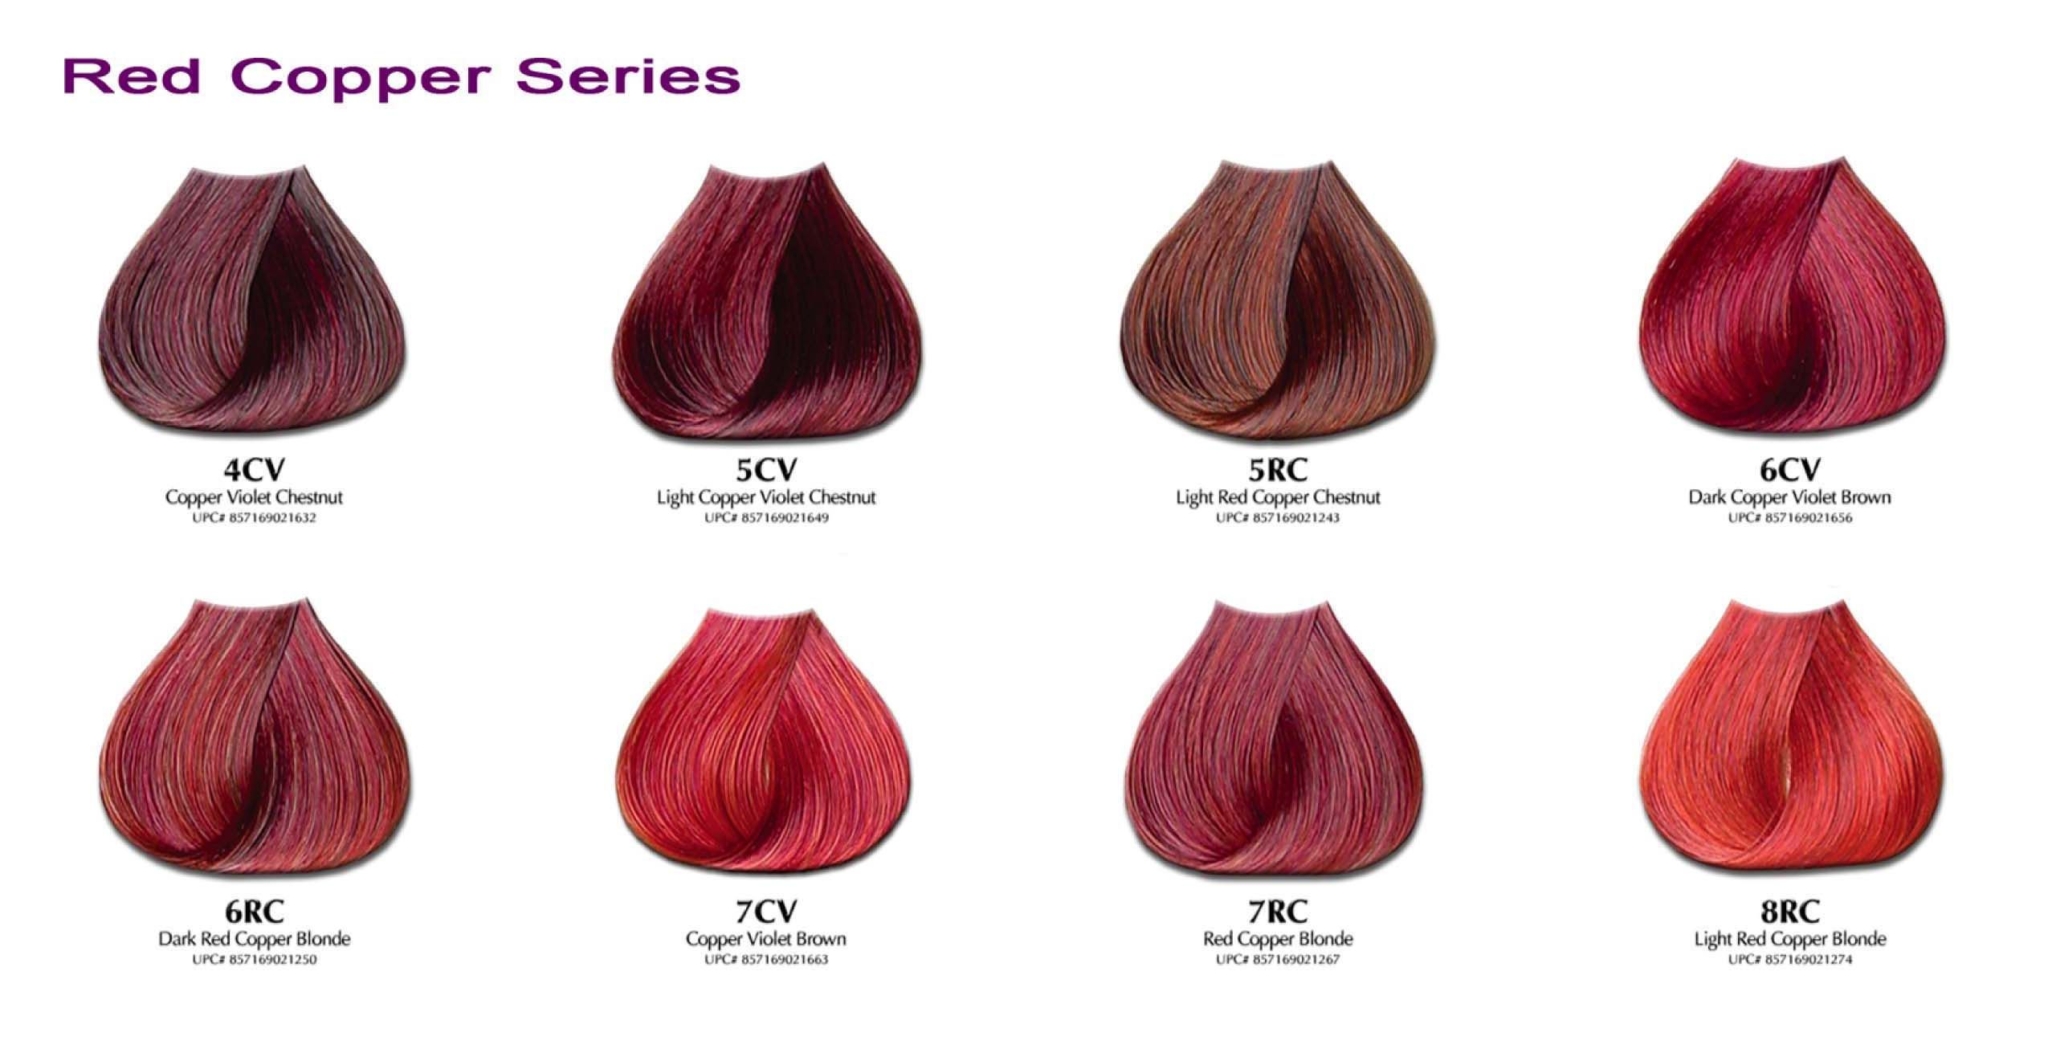 2. How to Use Ion Color Brilliance Brights Semi-Permanent Hair Color - wide 4